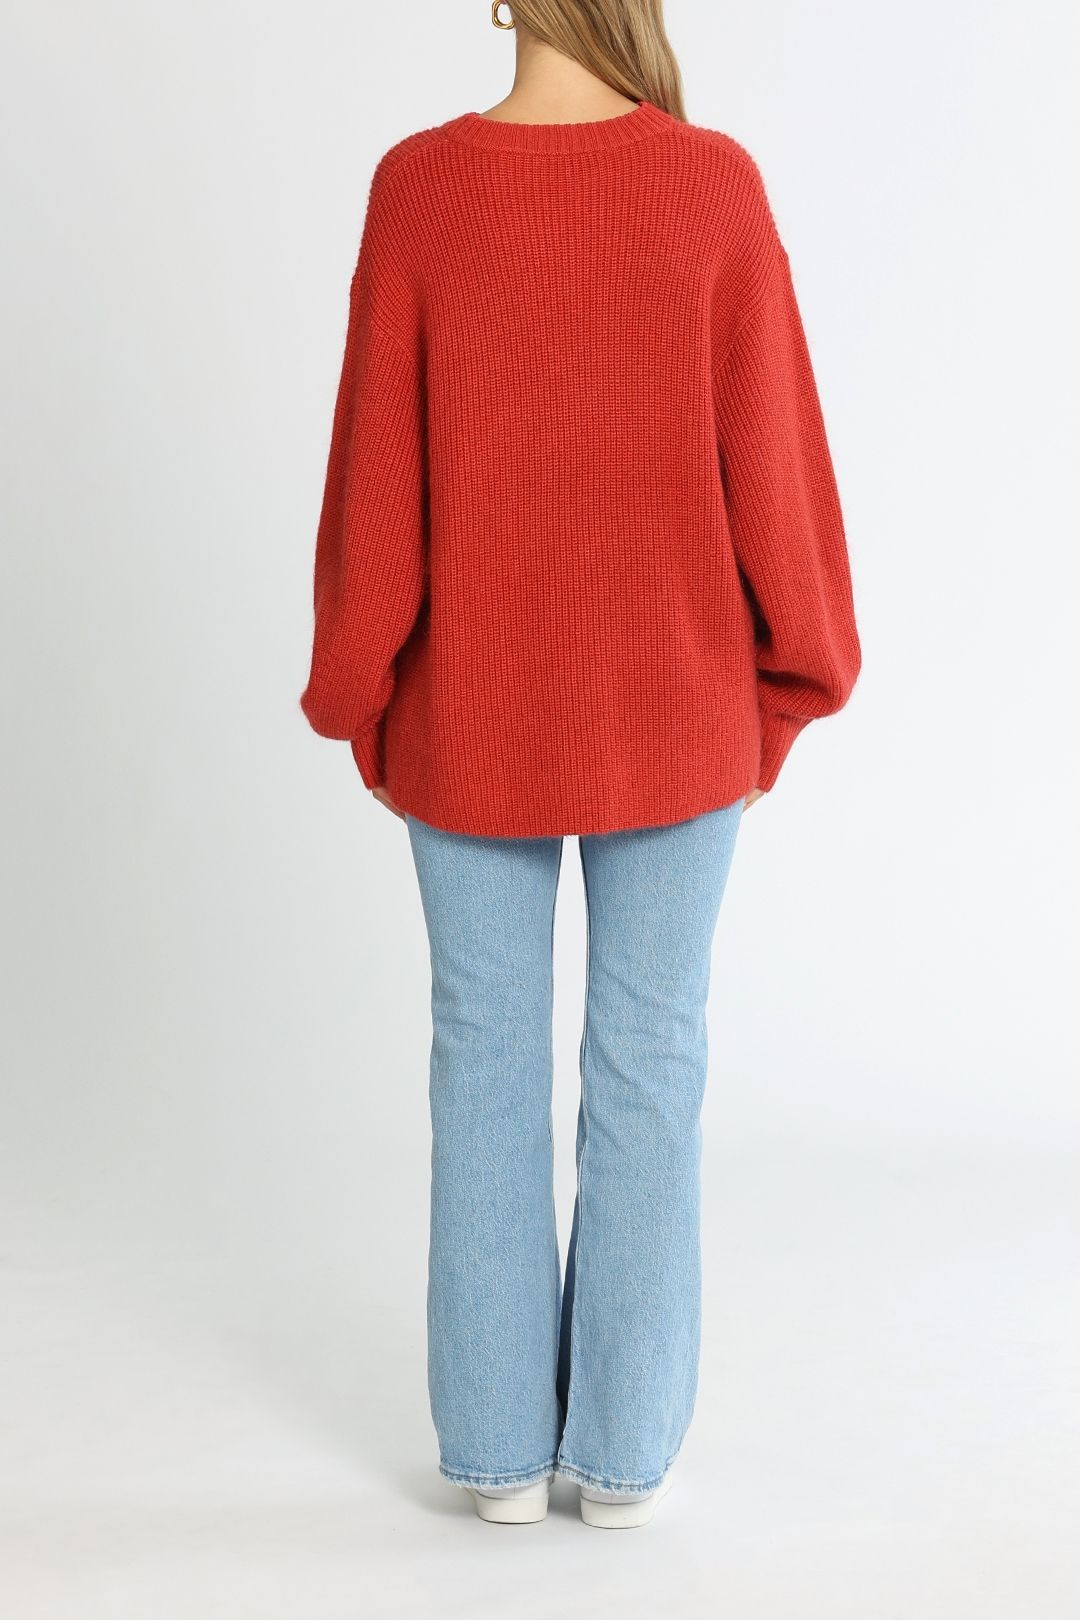 Camilla and Marc Nichols Knit Sweater Watermelon Relaxed Fit